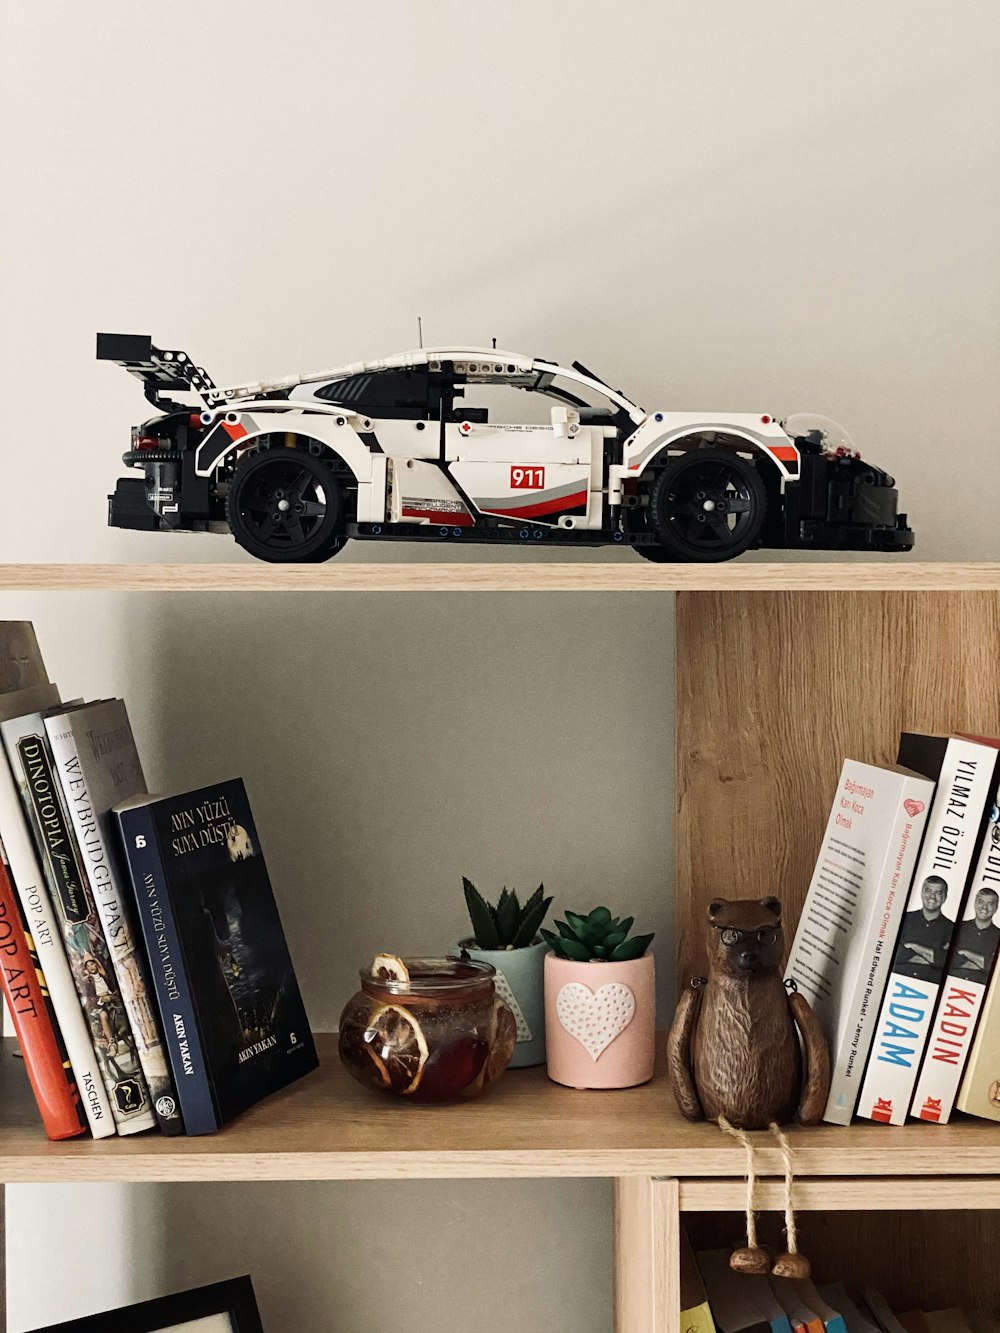 a toy car is sitting on top of a bookshelf